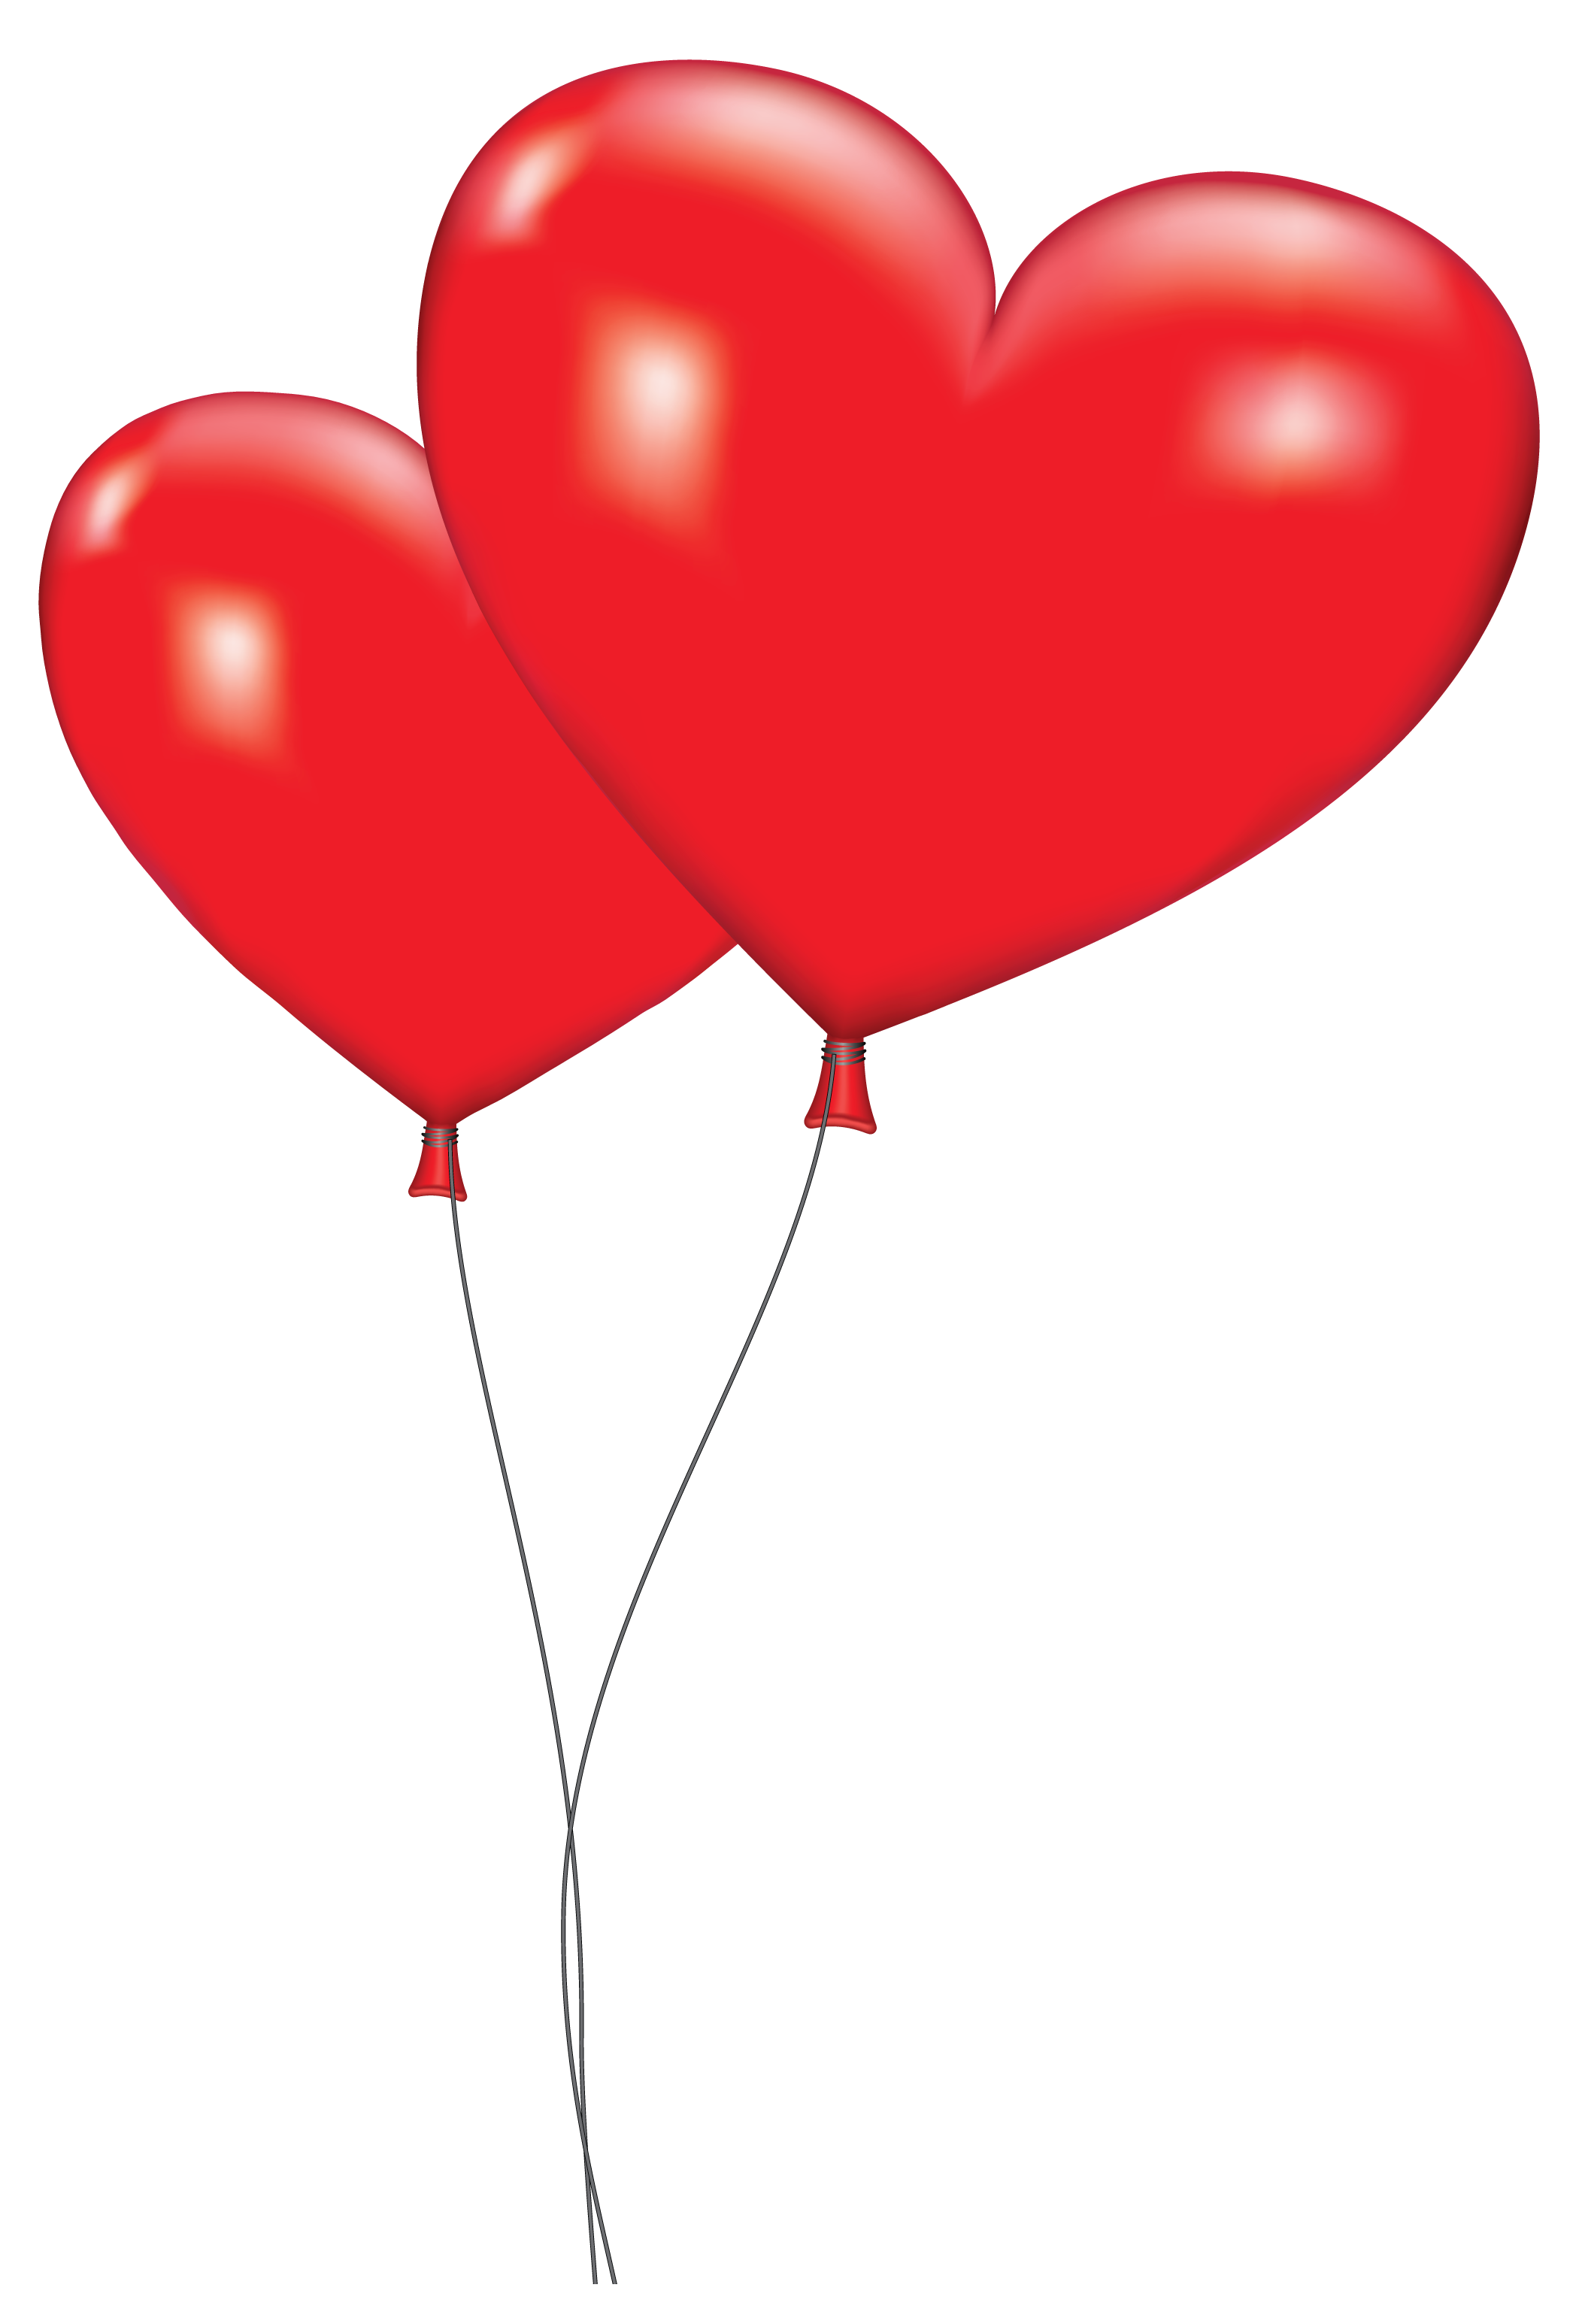 Orange Balloon Clipart Large Red Heart Balloons Png Clipart Picture